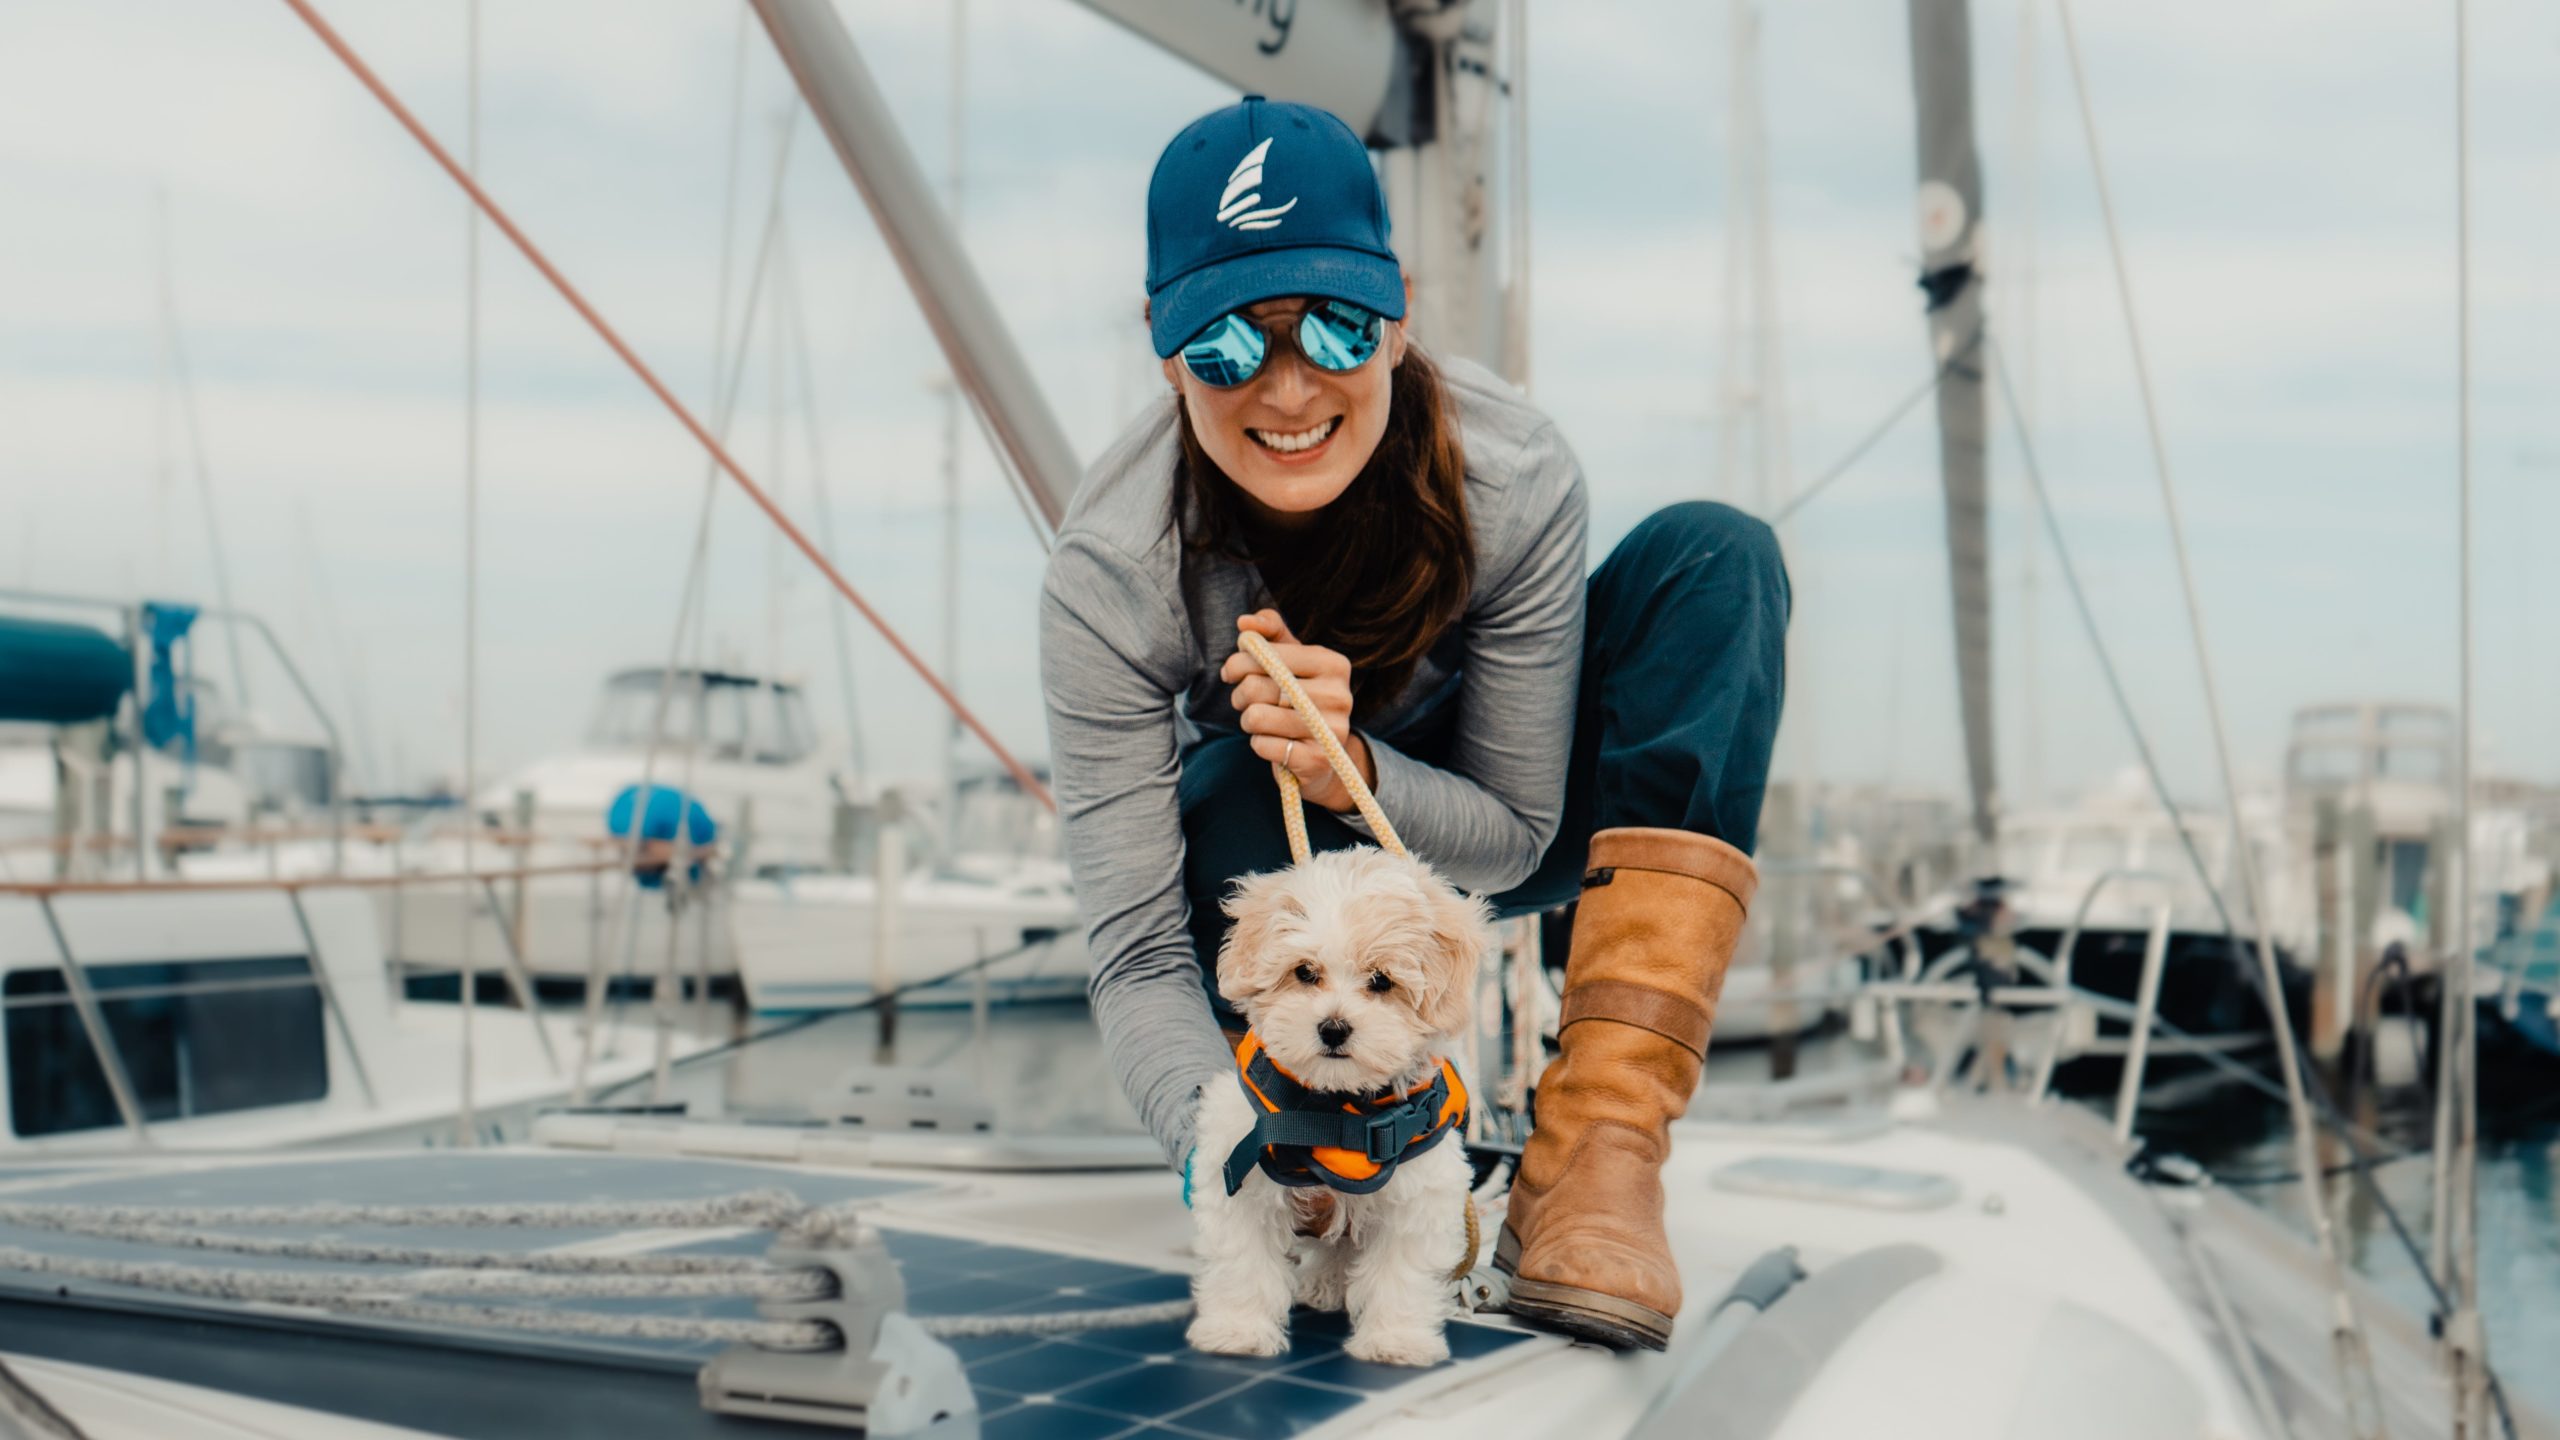 Sophie Darsy with her dog Barnacle.